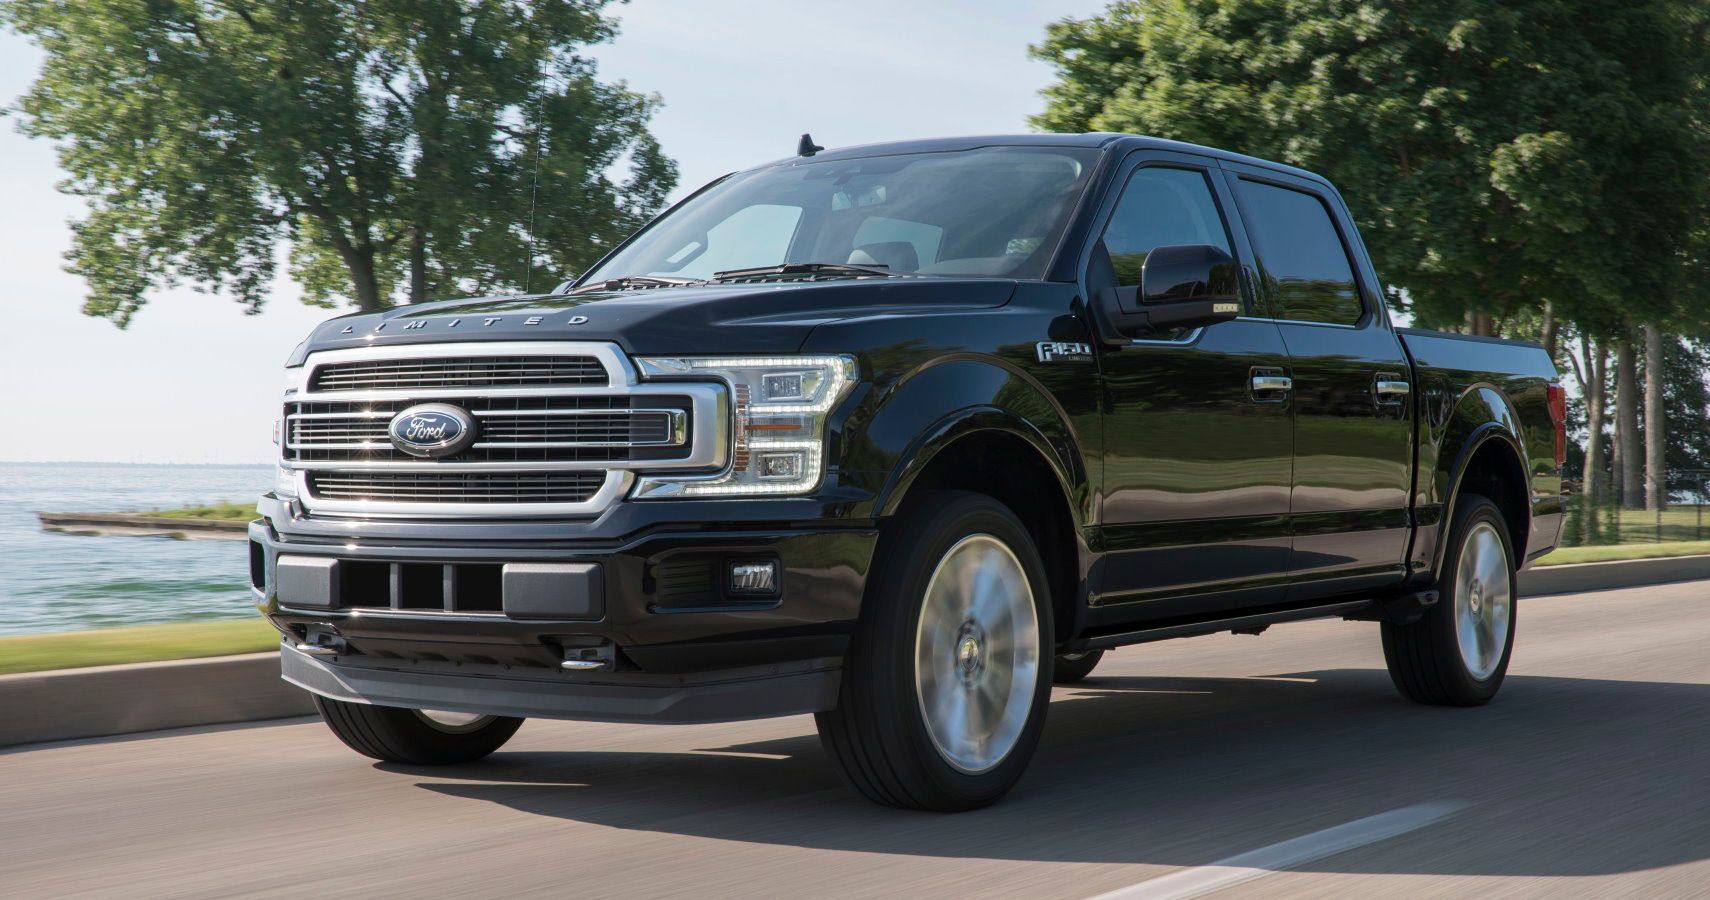 Thanks to the addition of a high-output 3.5-liter EcoBoost?? V6 engine, the 2019 Ford F-150 Limited is the most powerful light-duty pickup in America